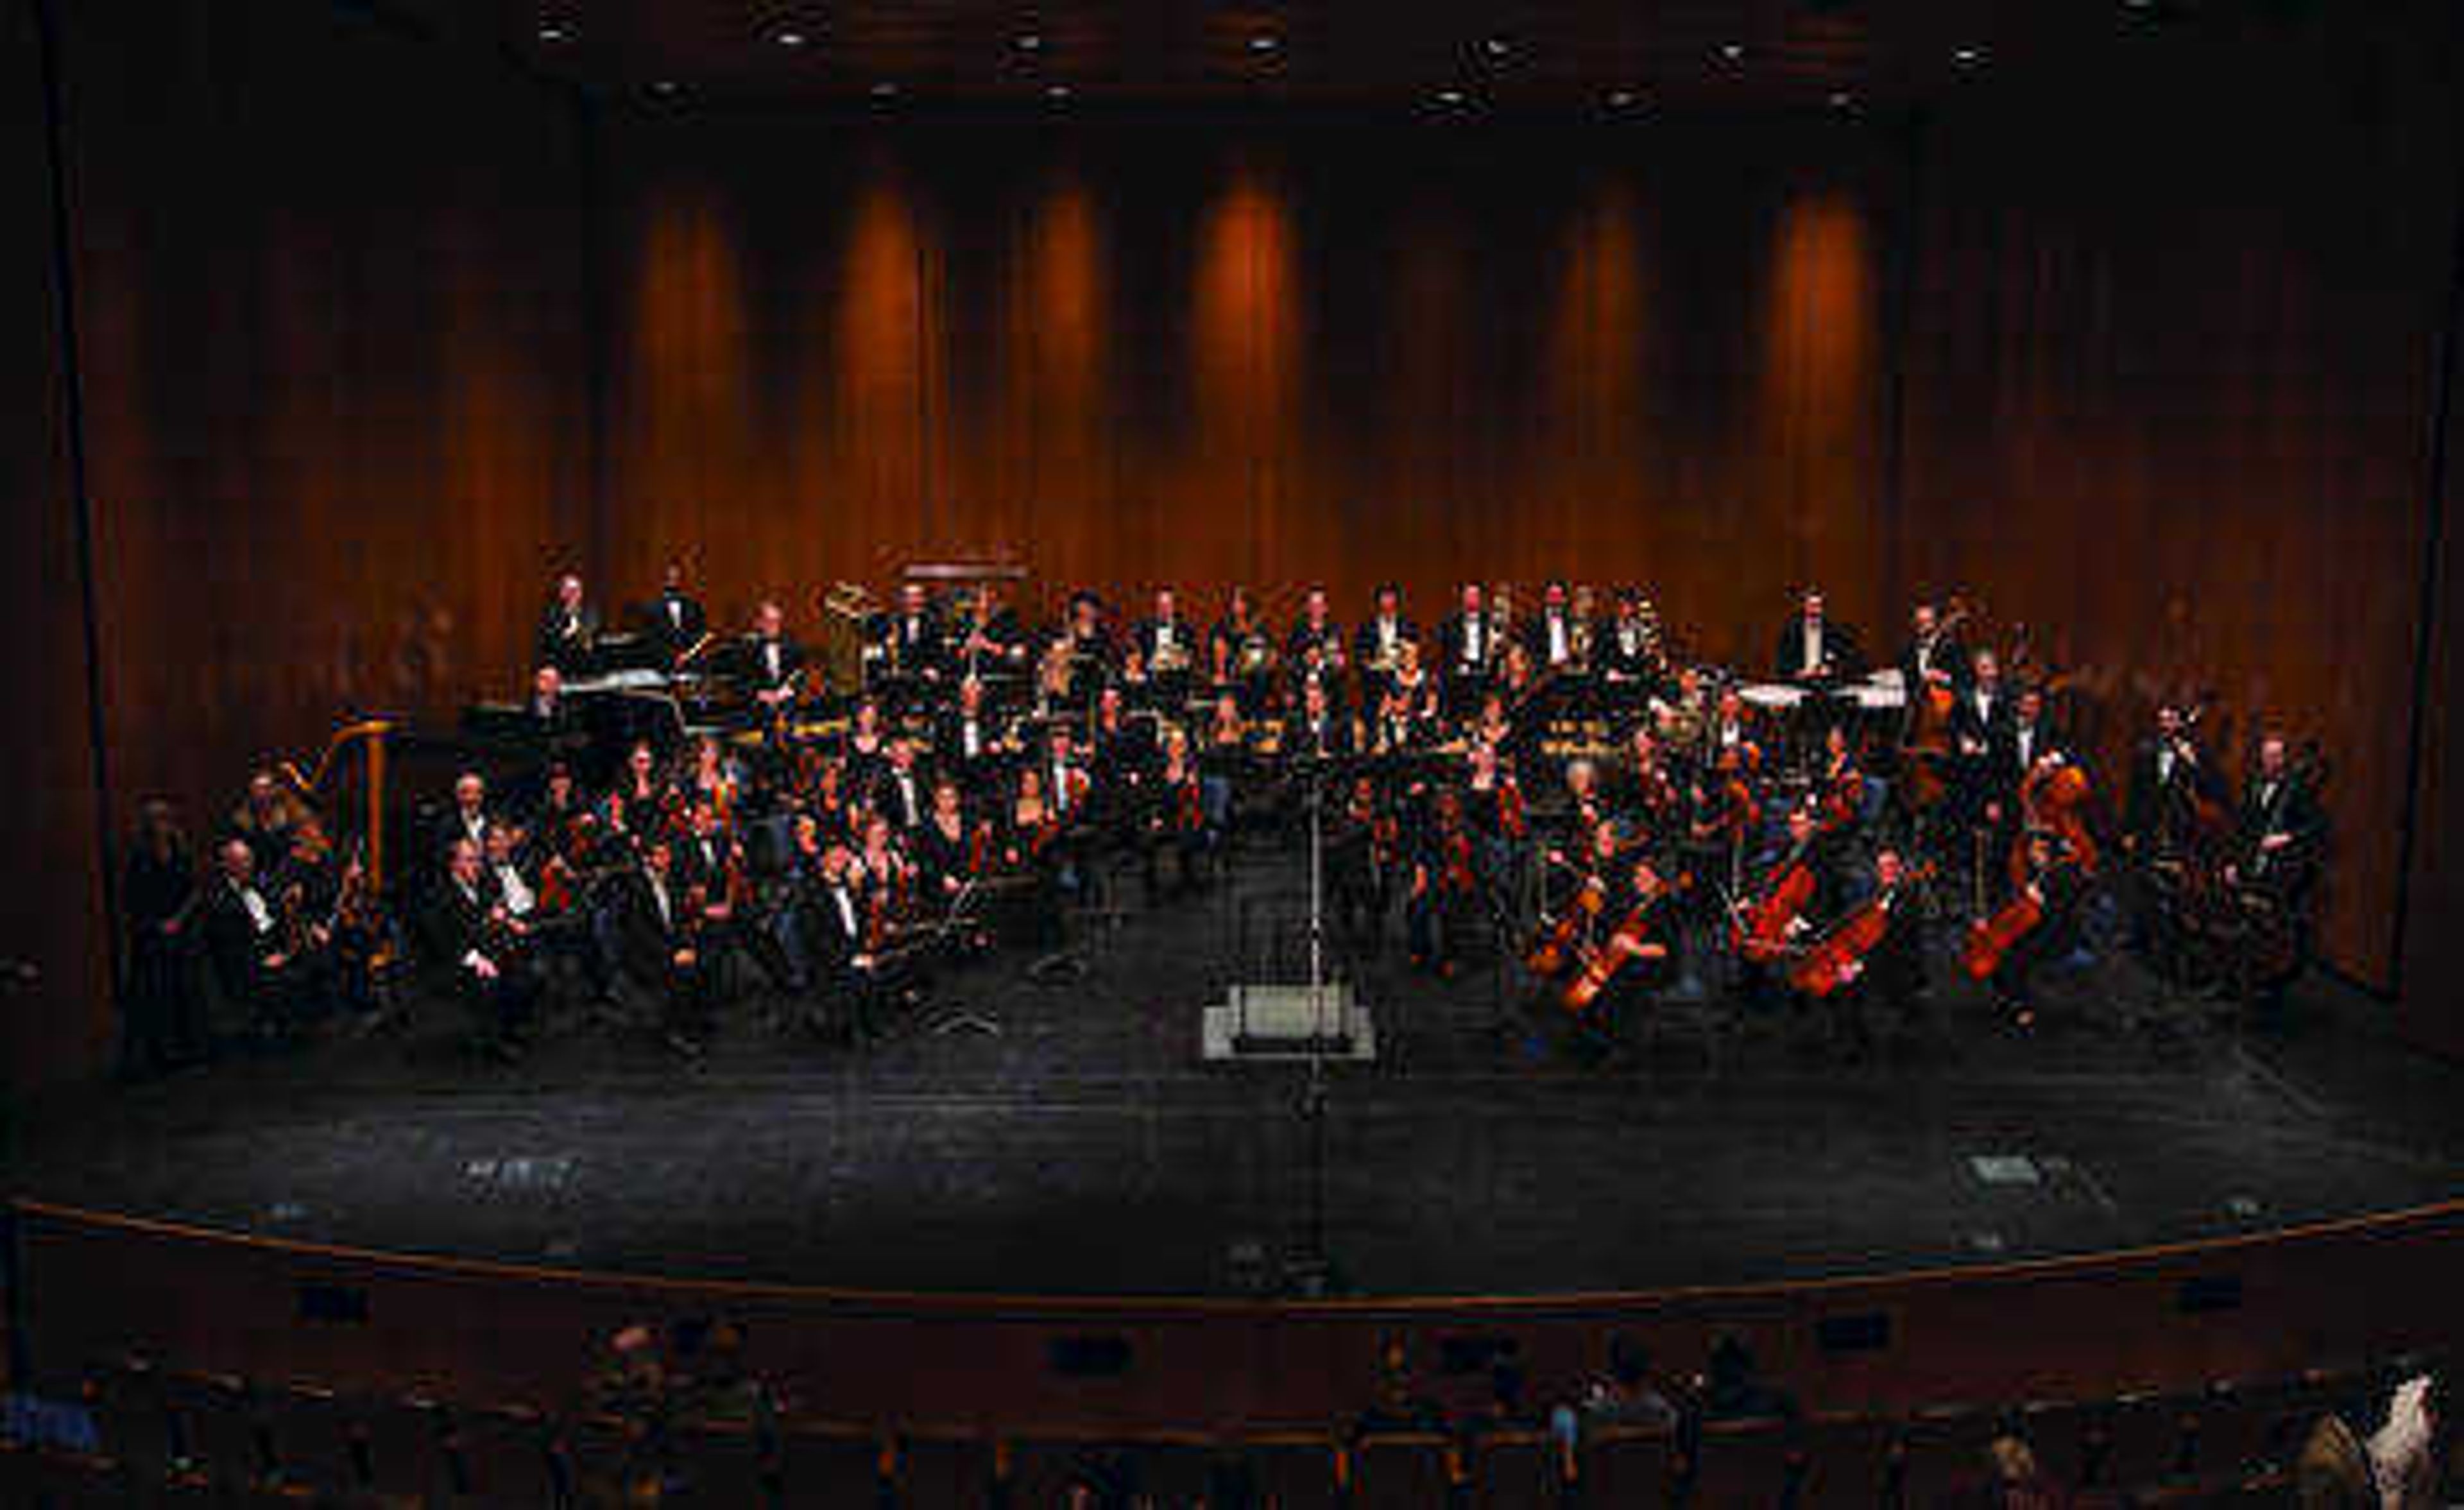 The Southeast Missouri Symphony Orchestra's "Symphonic Stars!" concert will be held at 7:30 p.m. March 10 in the Donald C. Bedell Performance Hall at the River Campus. File photo